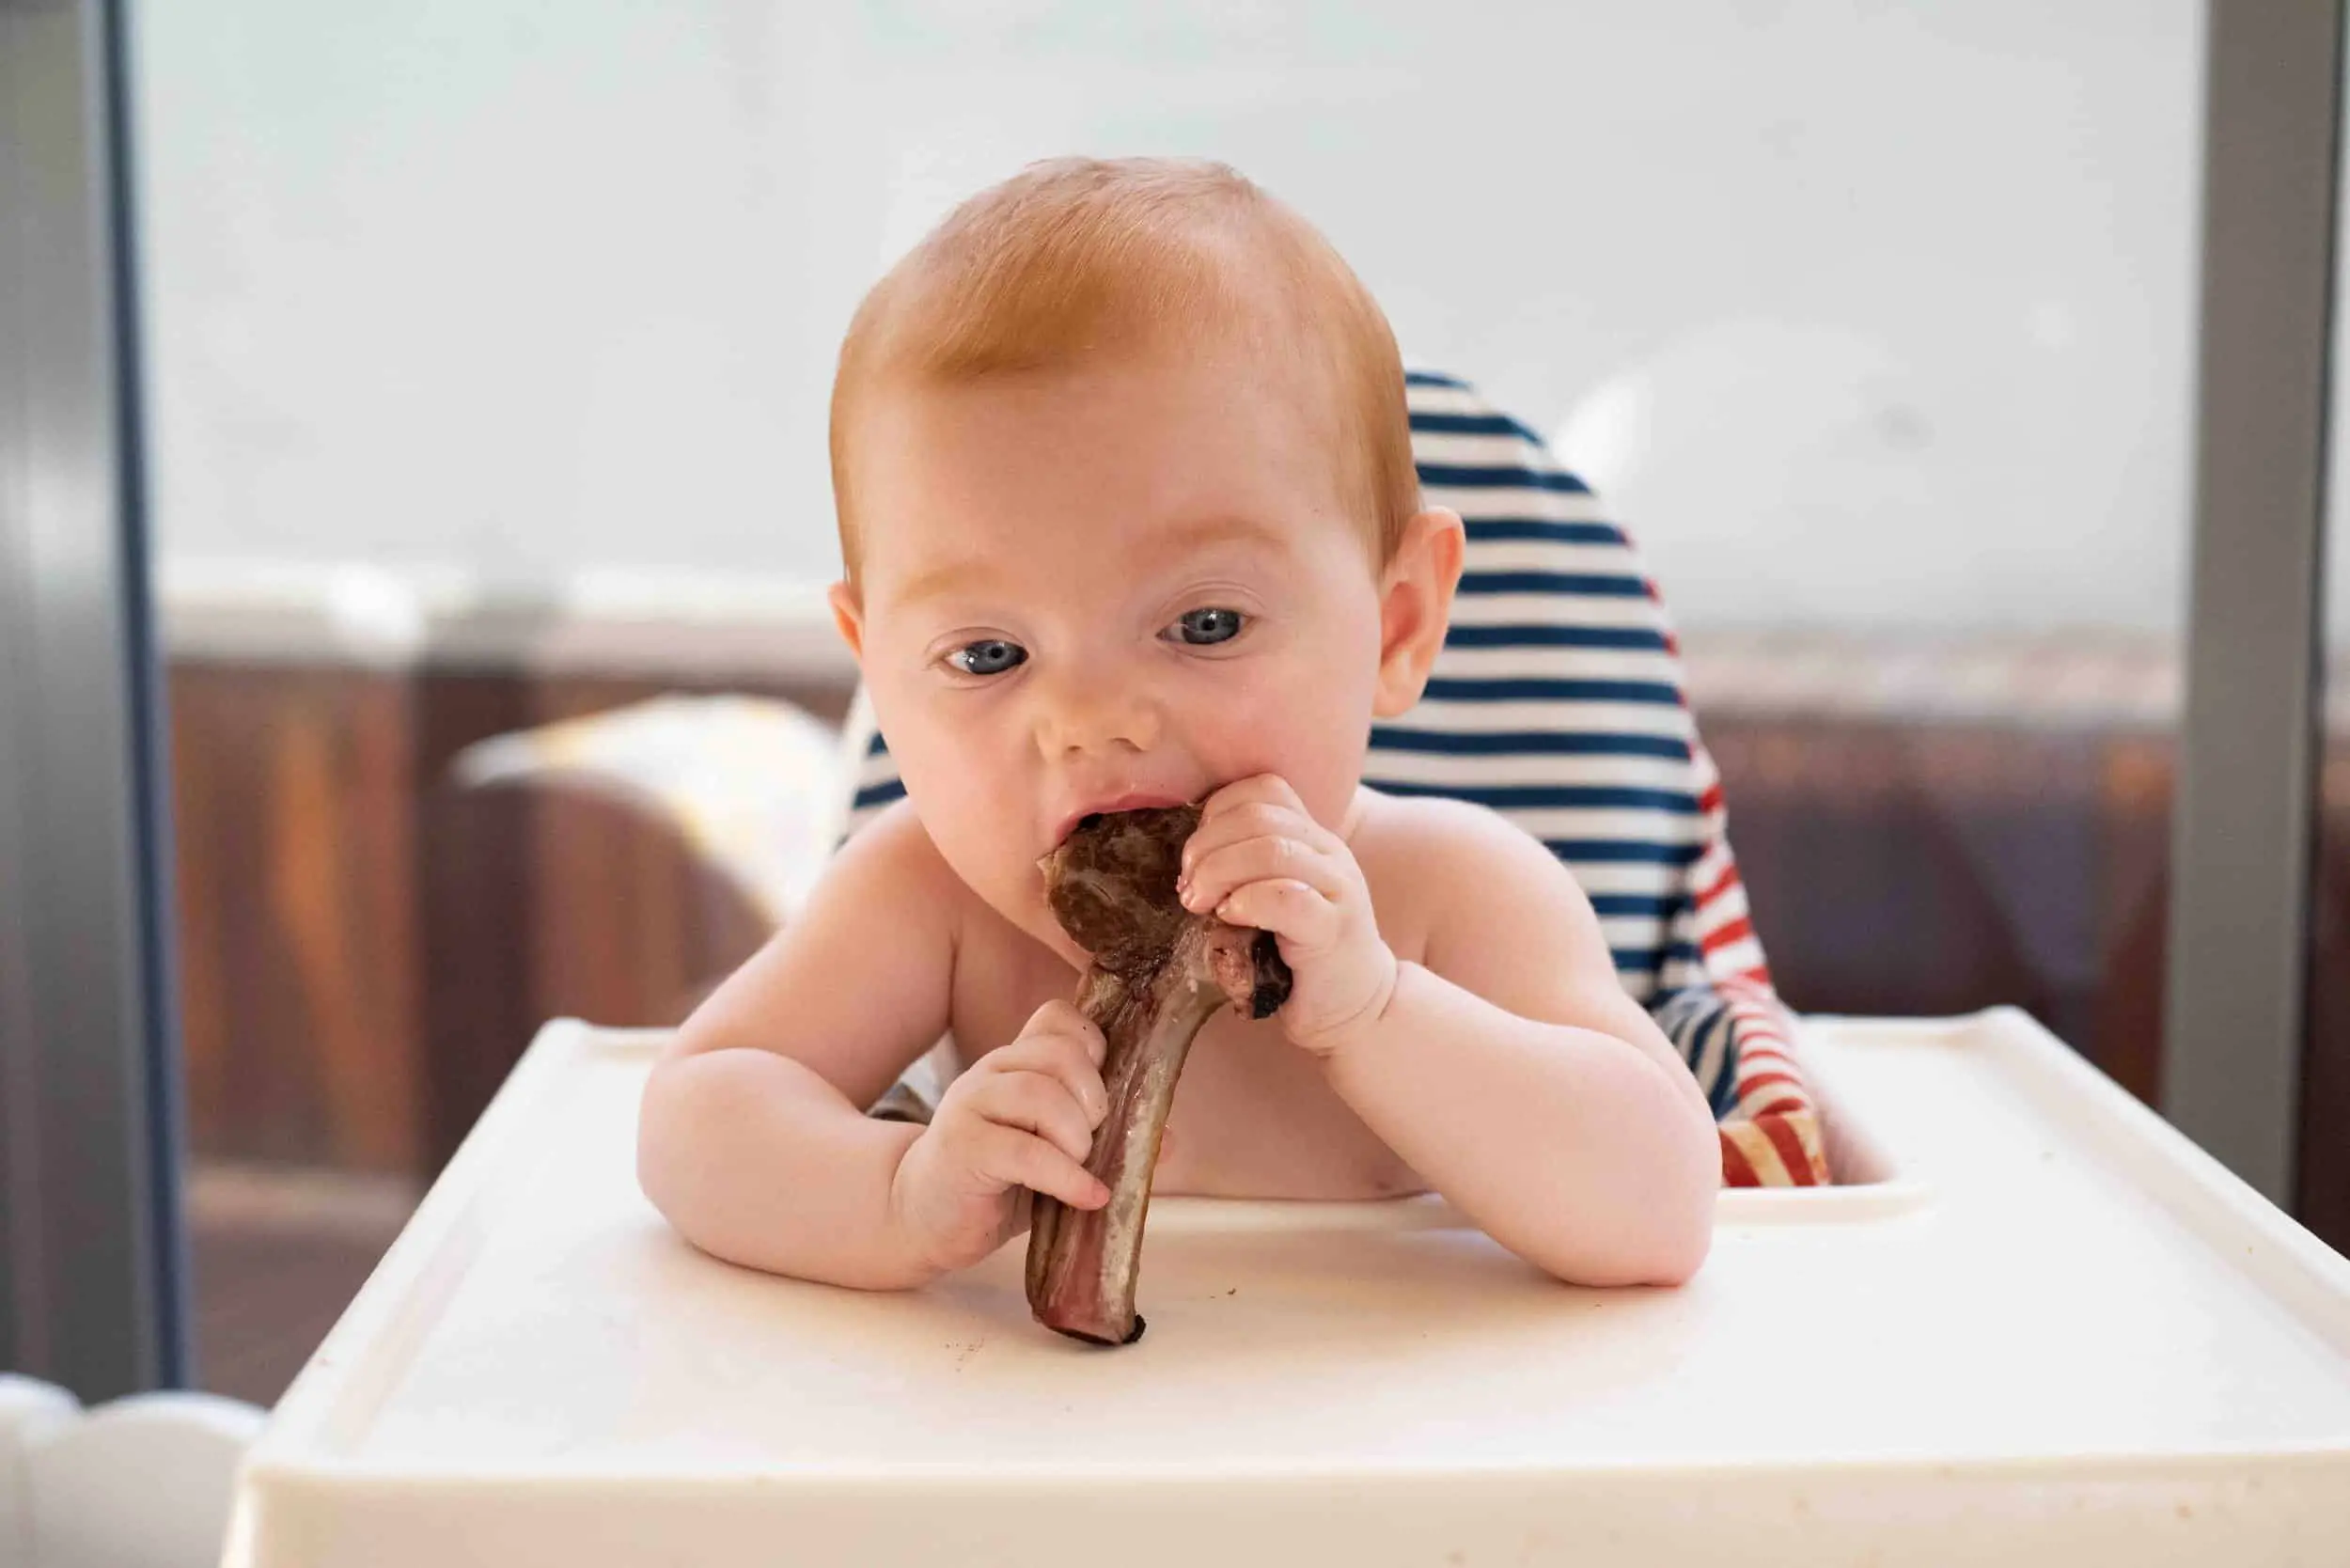 Iron Rich Foods for Babies, Kids & Toddlers - What Foods are High in Iron for Baby?